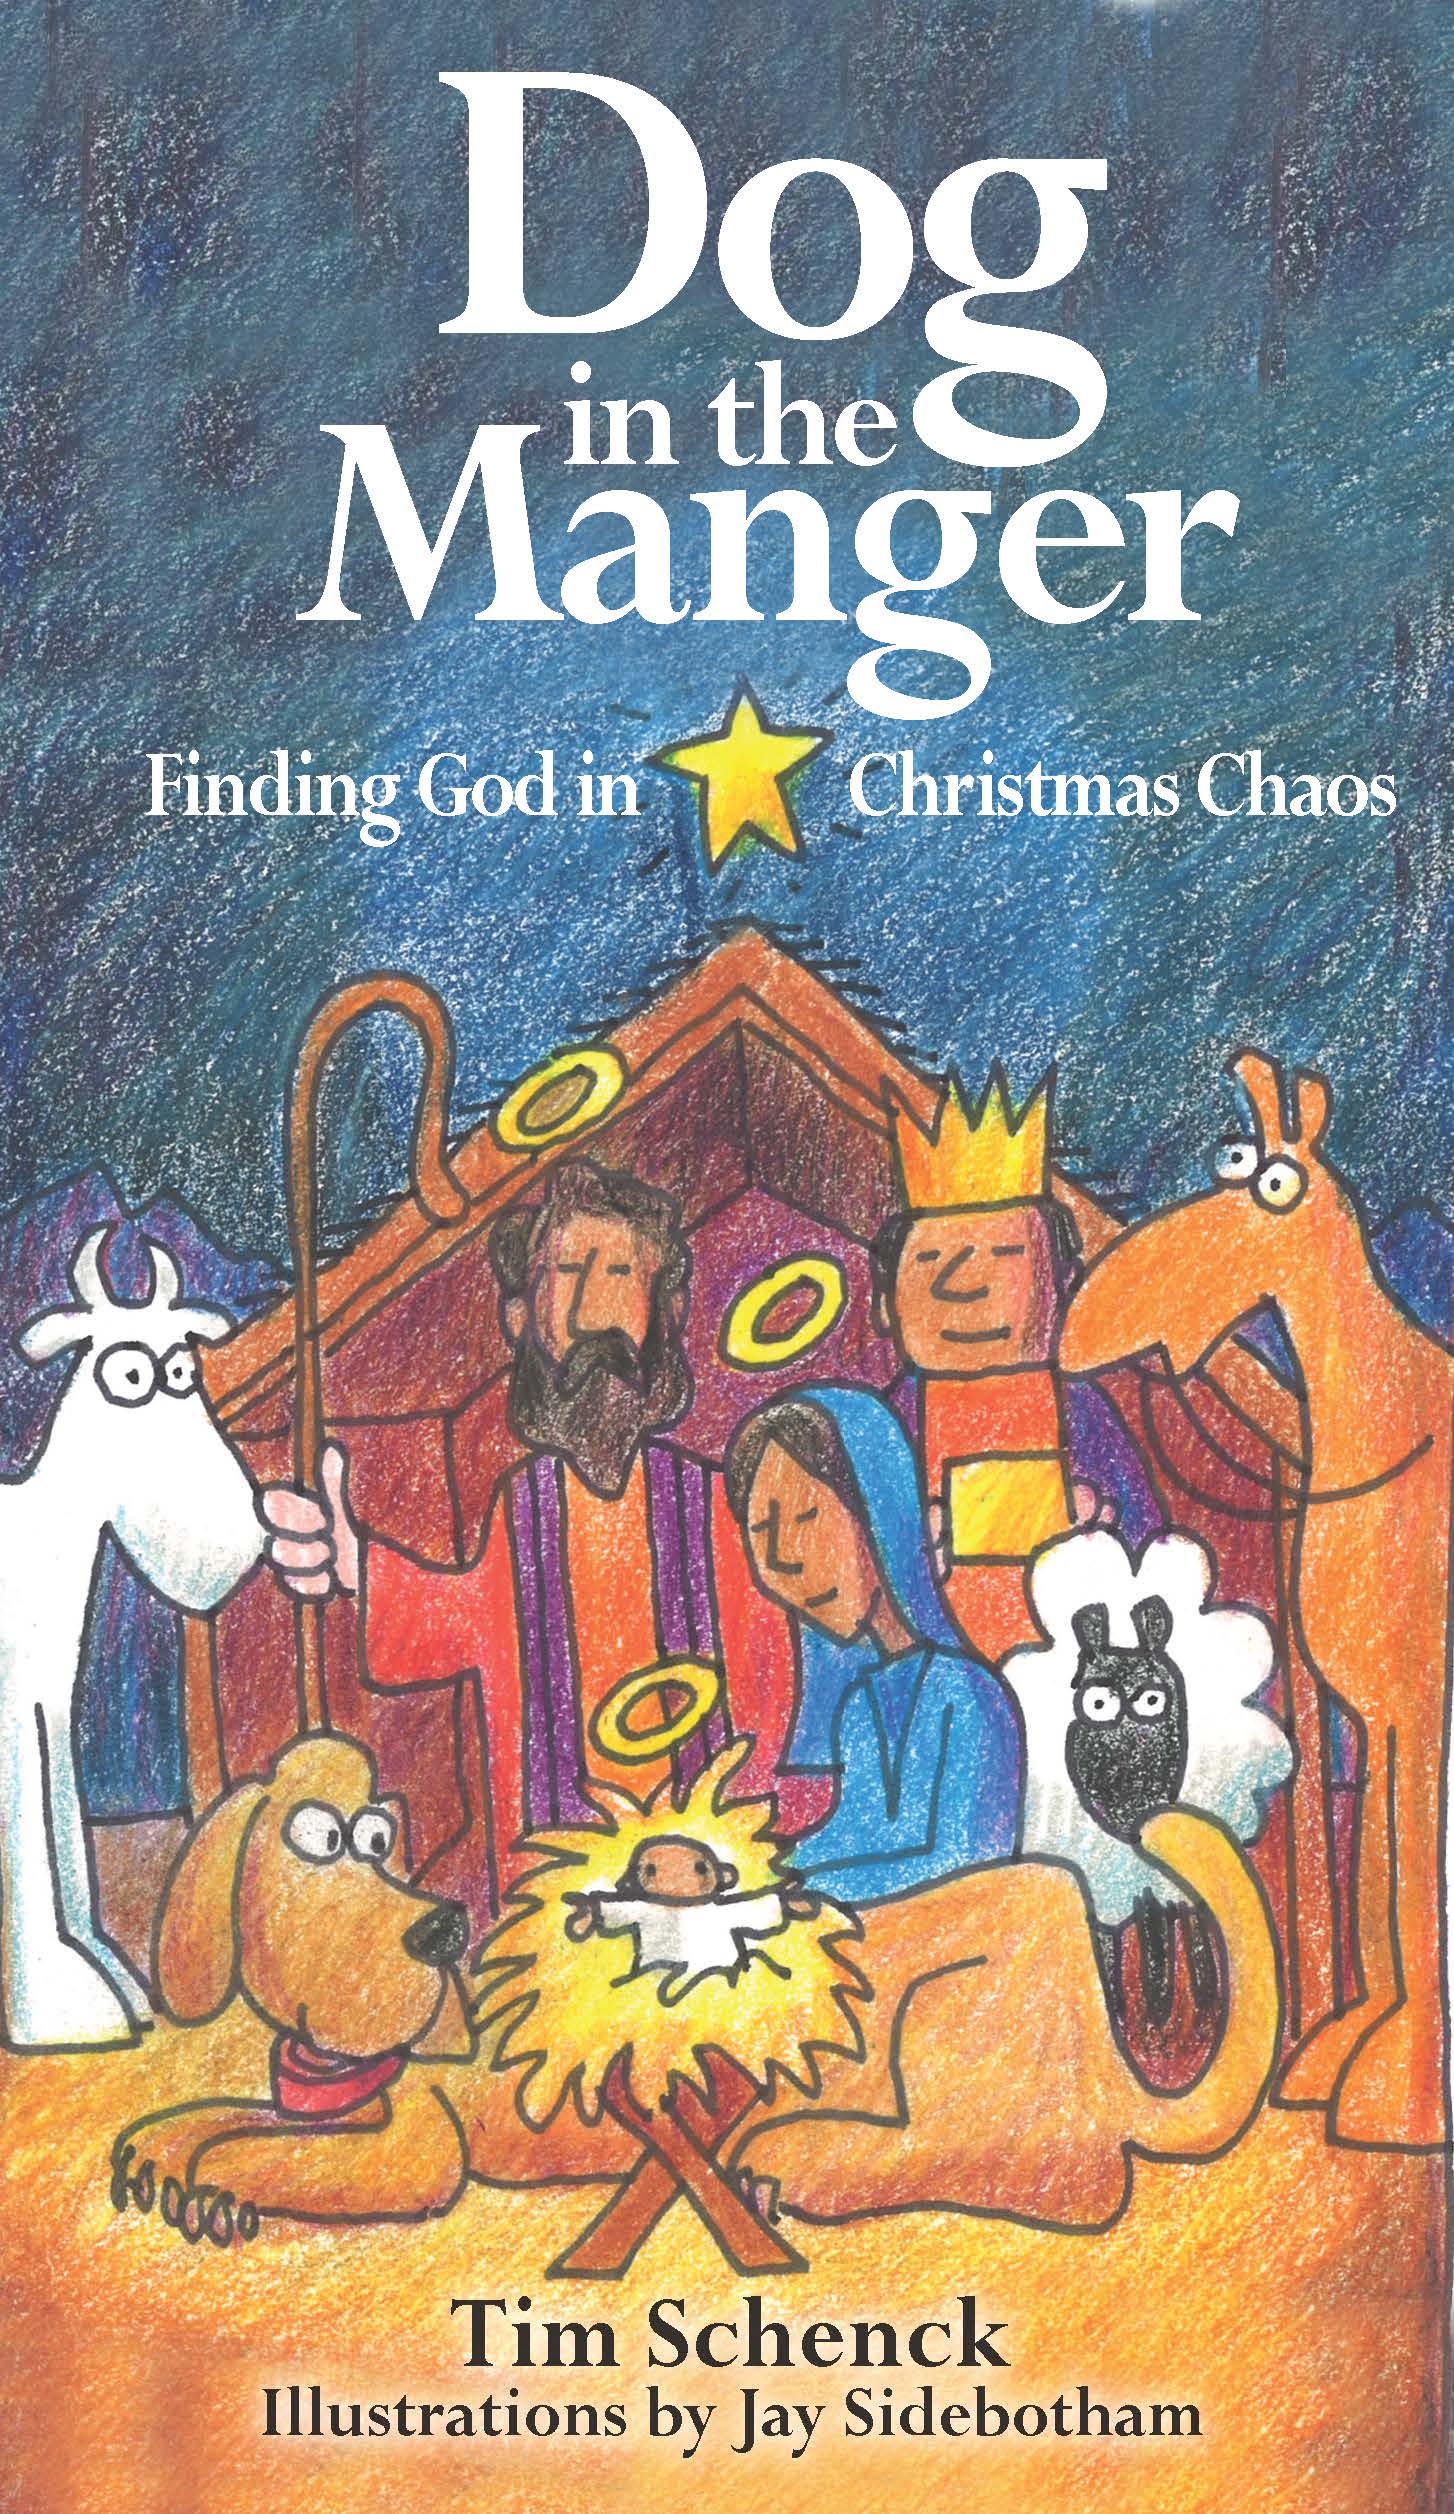 The Dog In The Manger  The Rev  Laurie M  Brock 2013 And Inspired    